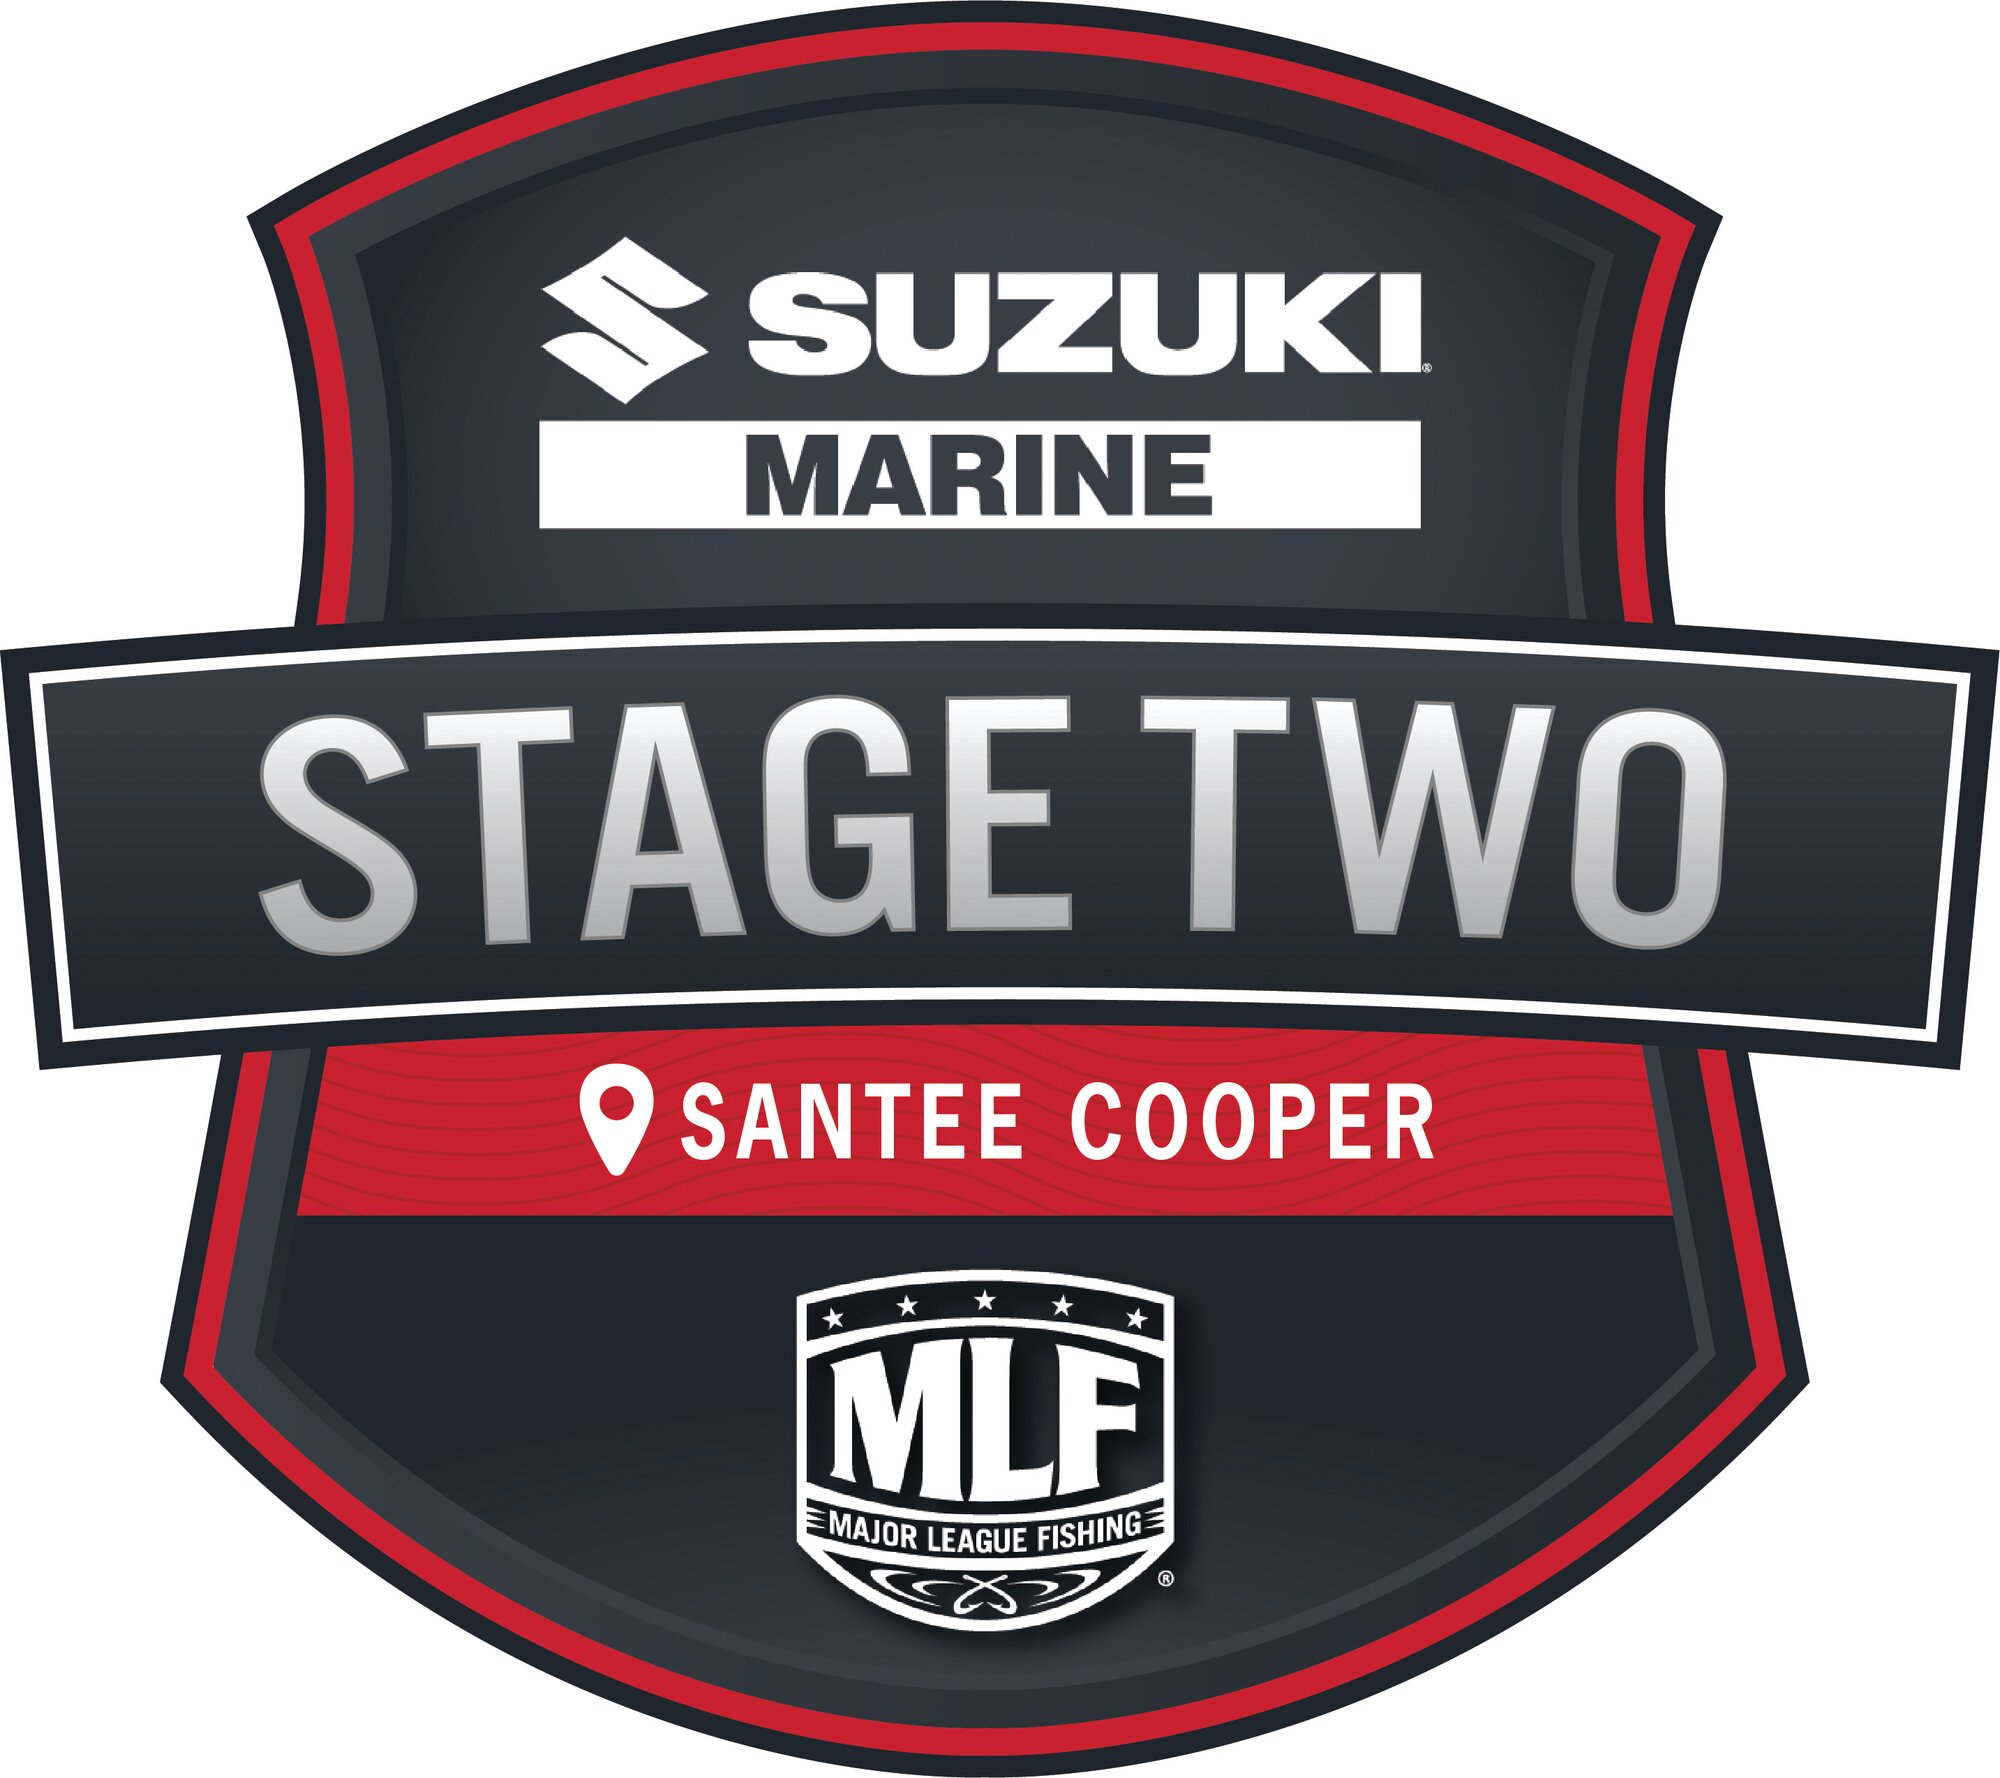 MLF Bass Pro Tour begins Suzuki Stage 2 at Santee Cooper Lakes, $100K on  the line - The Sumter Item